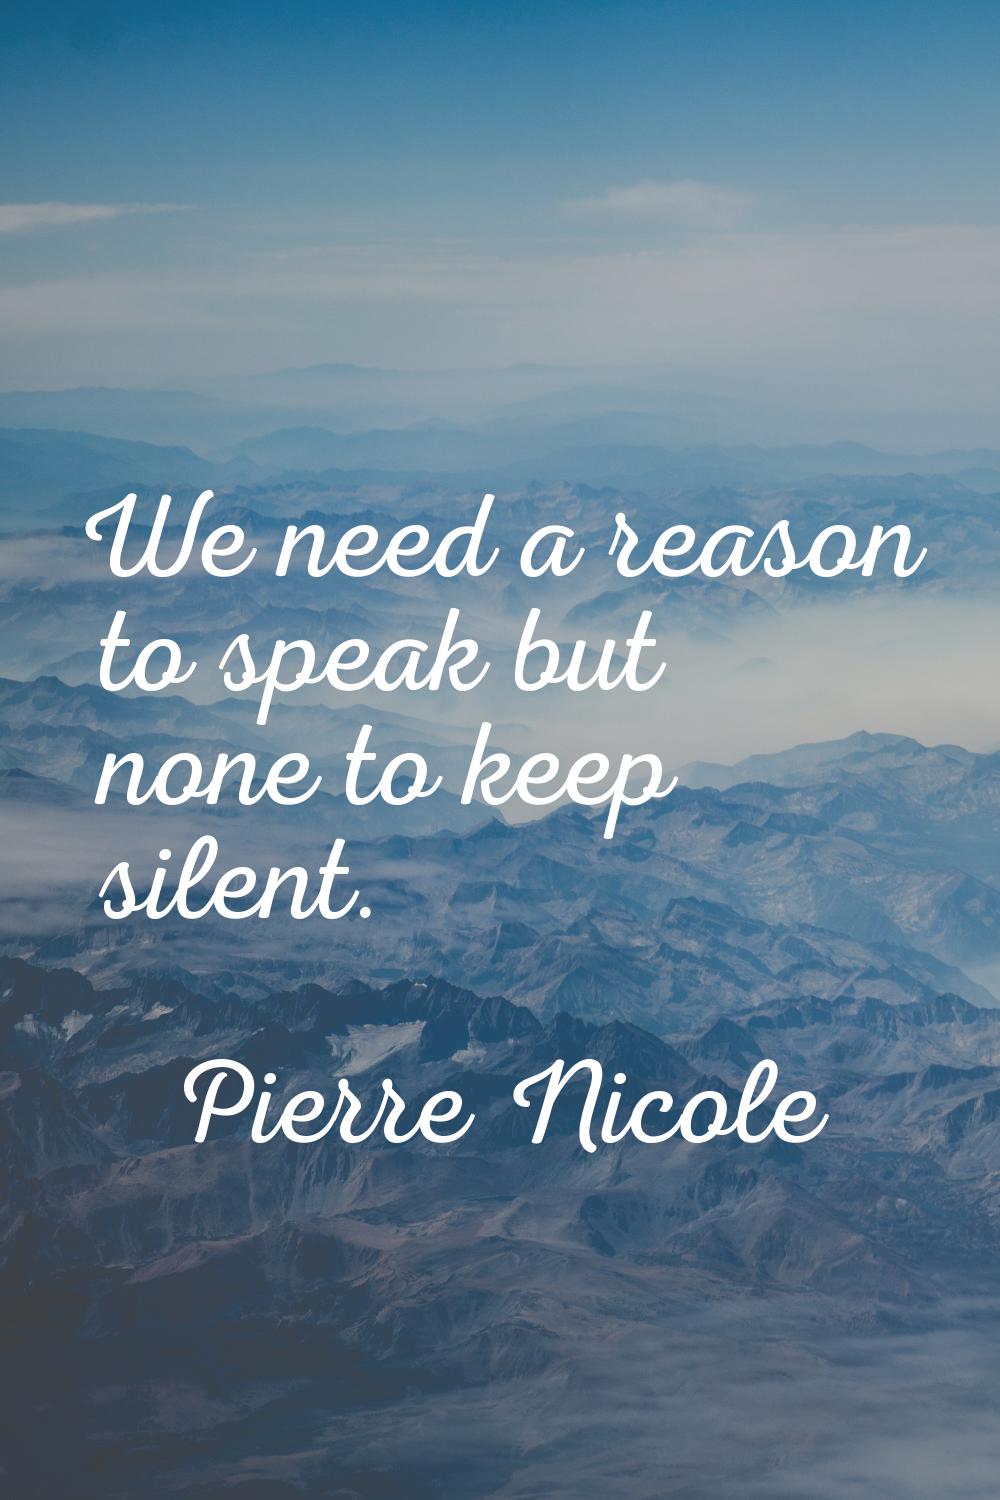 We need a reason to speak but none to keep silent.